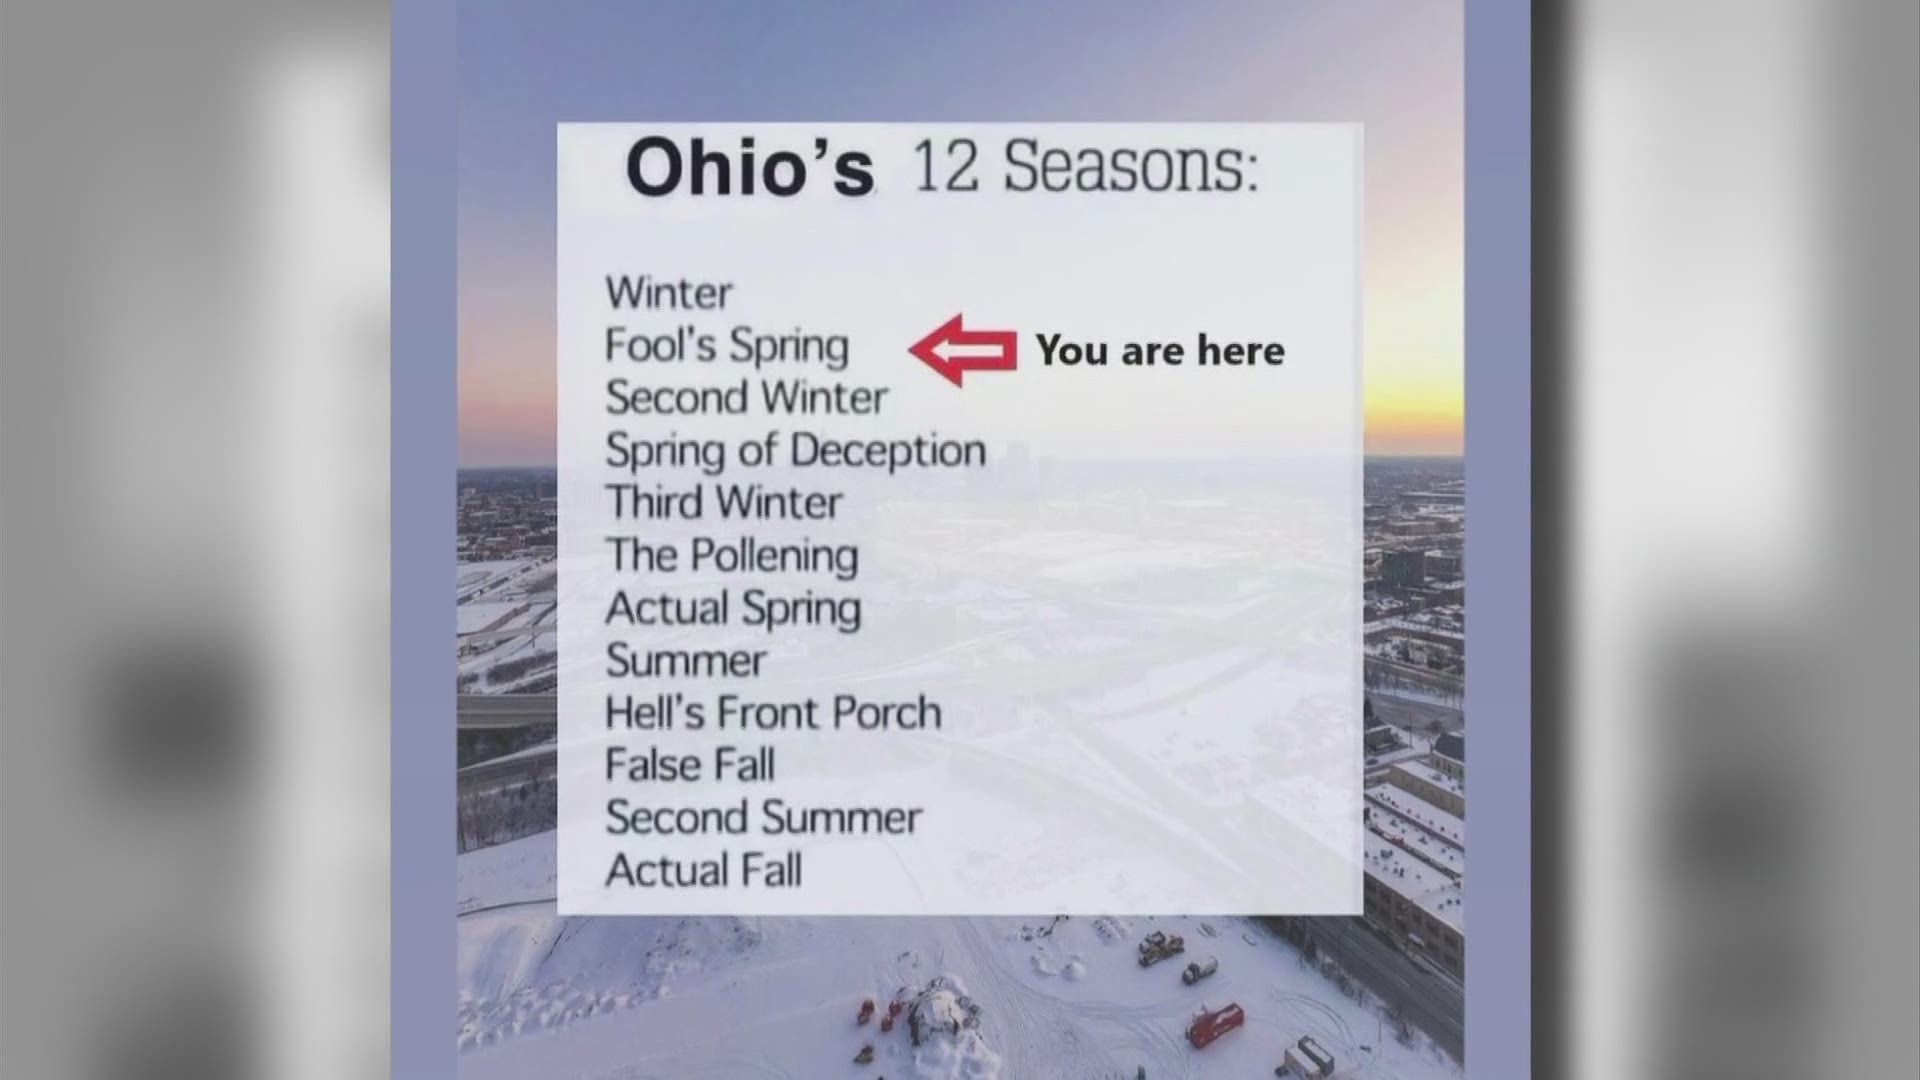 A popular meme says Ohio has 12 seasons, including Fool's Spring, False Fall and The Pollening.